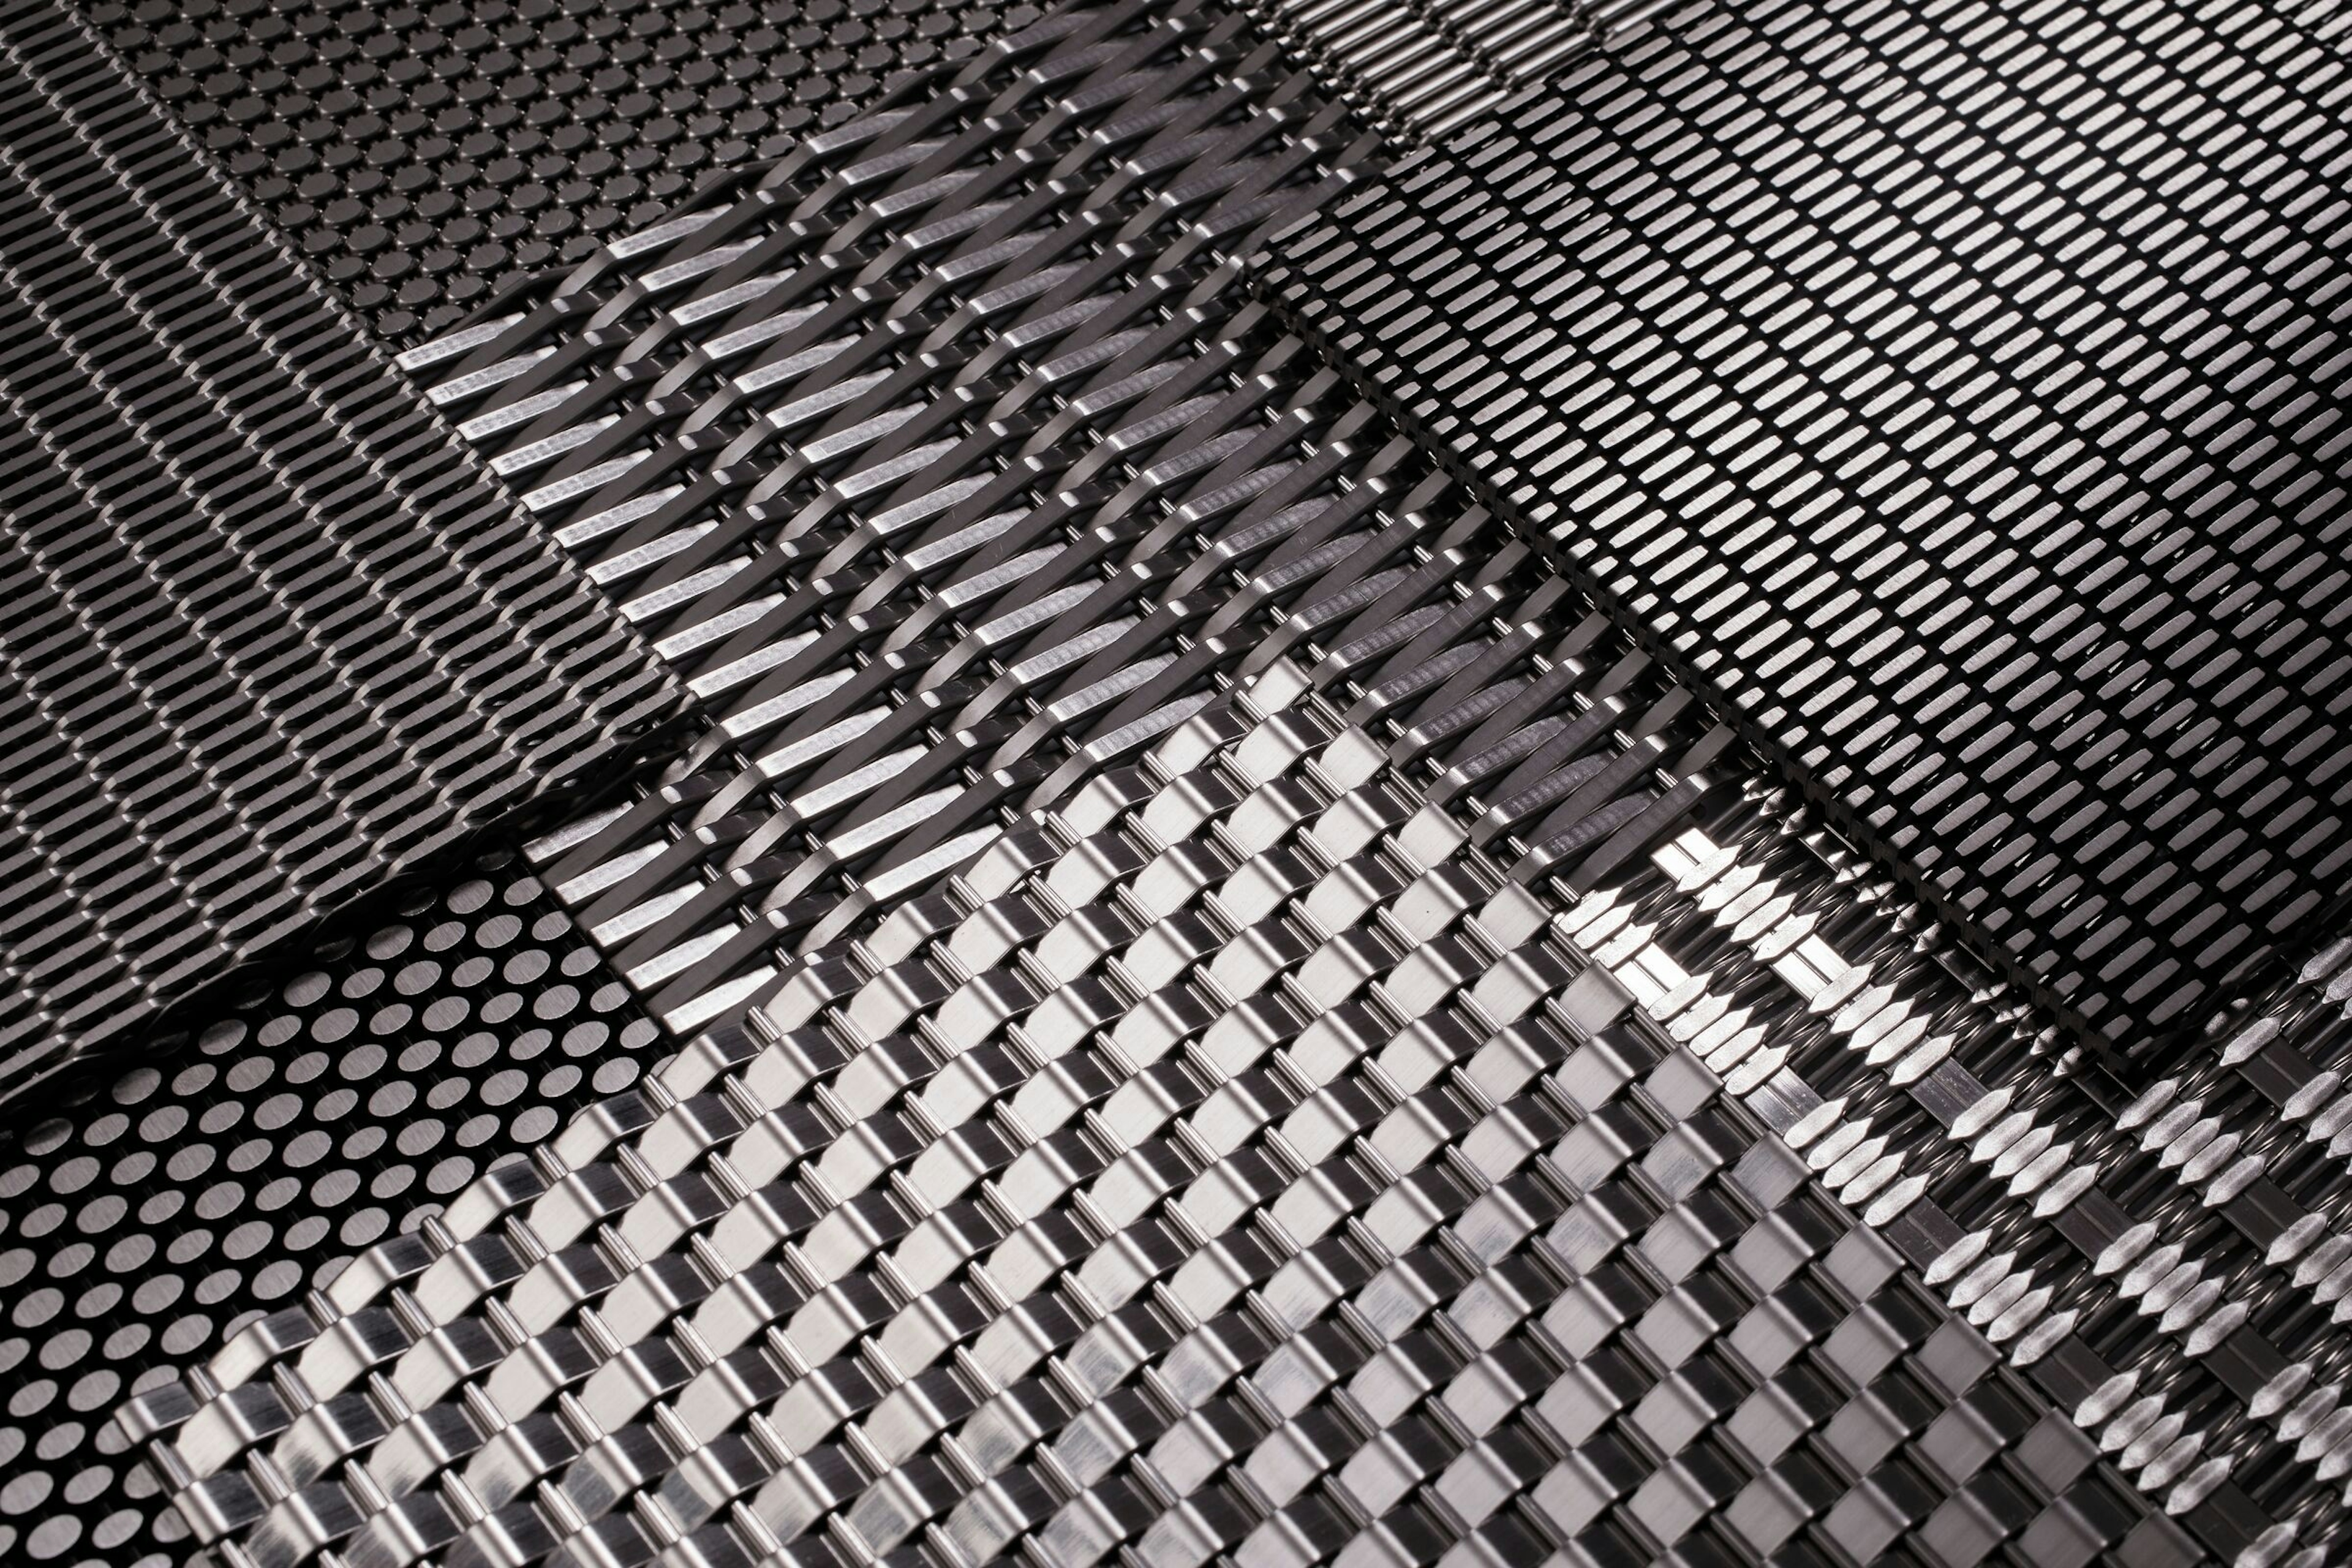 Linq Woven Metal: undefined